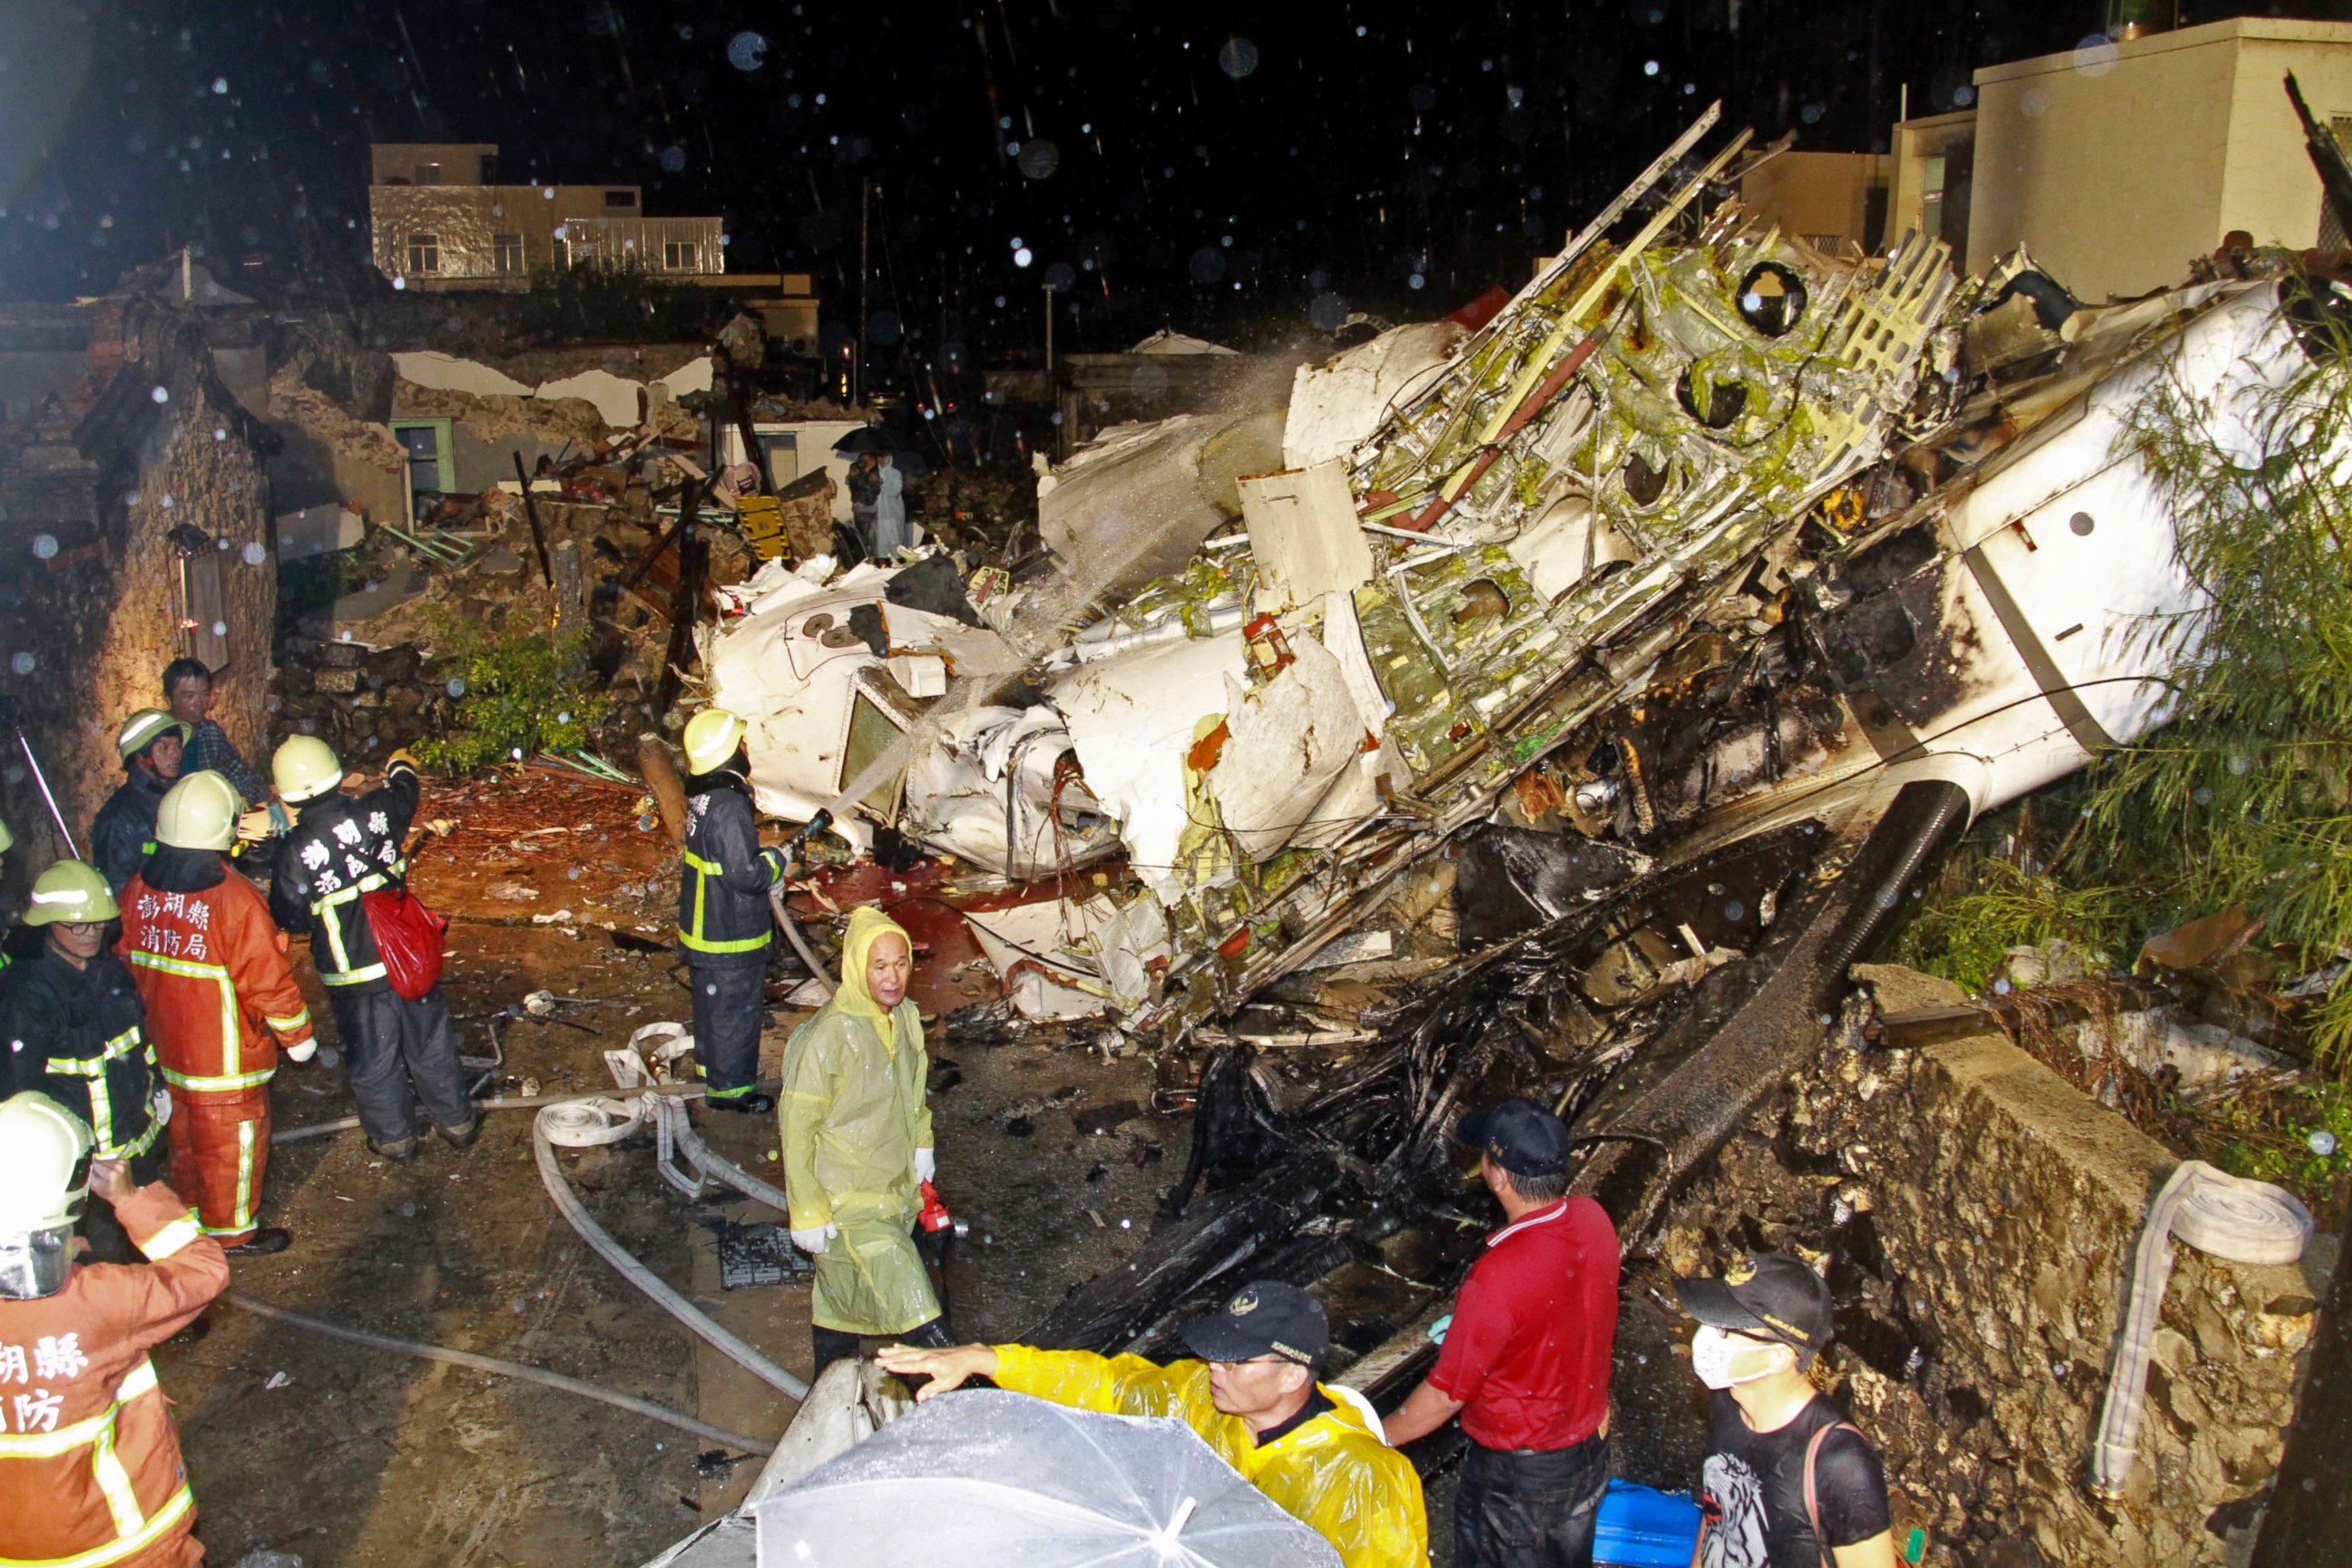 PHOTO: Rescue workers work next to the wreckage of TransAsia Airways flight GE222 which crashed while attempting to land in stormy weather on the Taiwanese island of Penghu, July 23, 2014. 